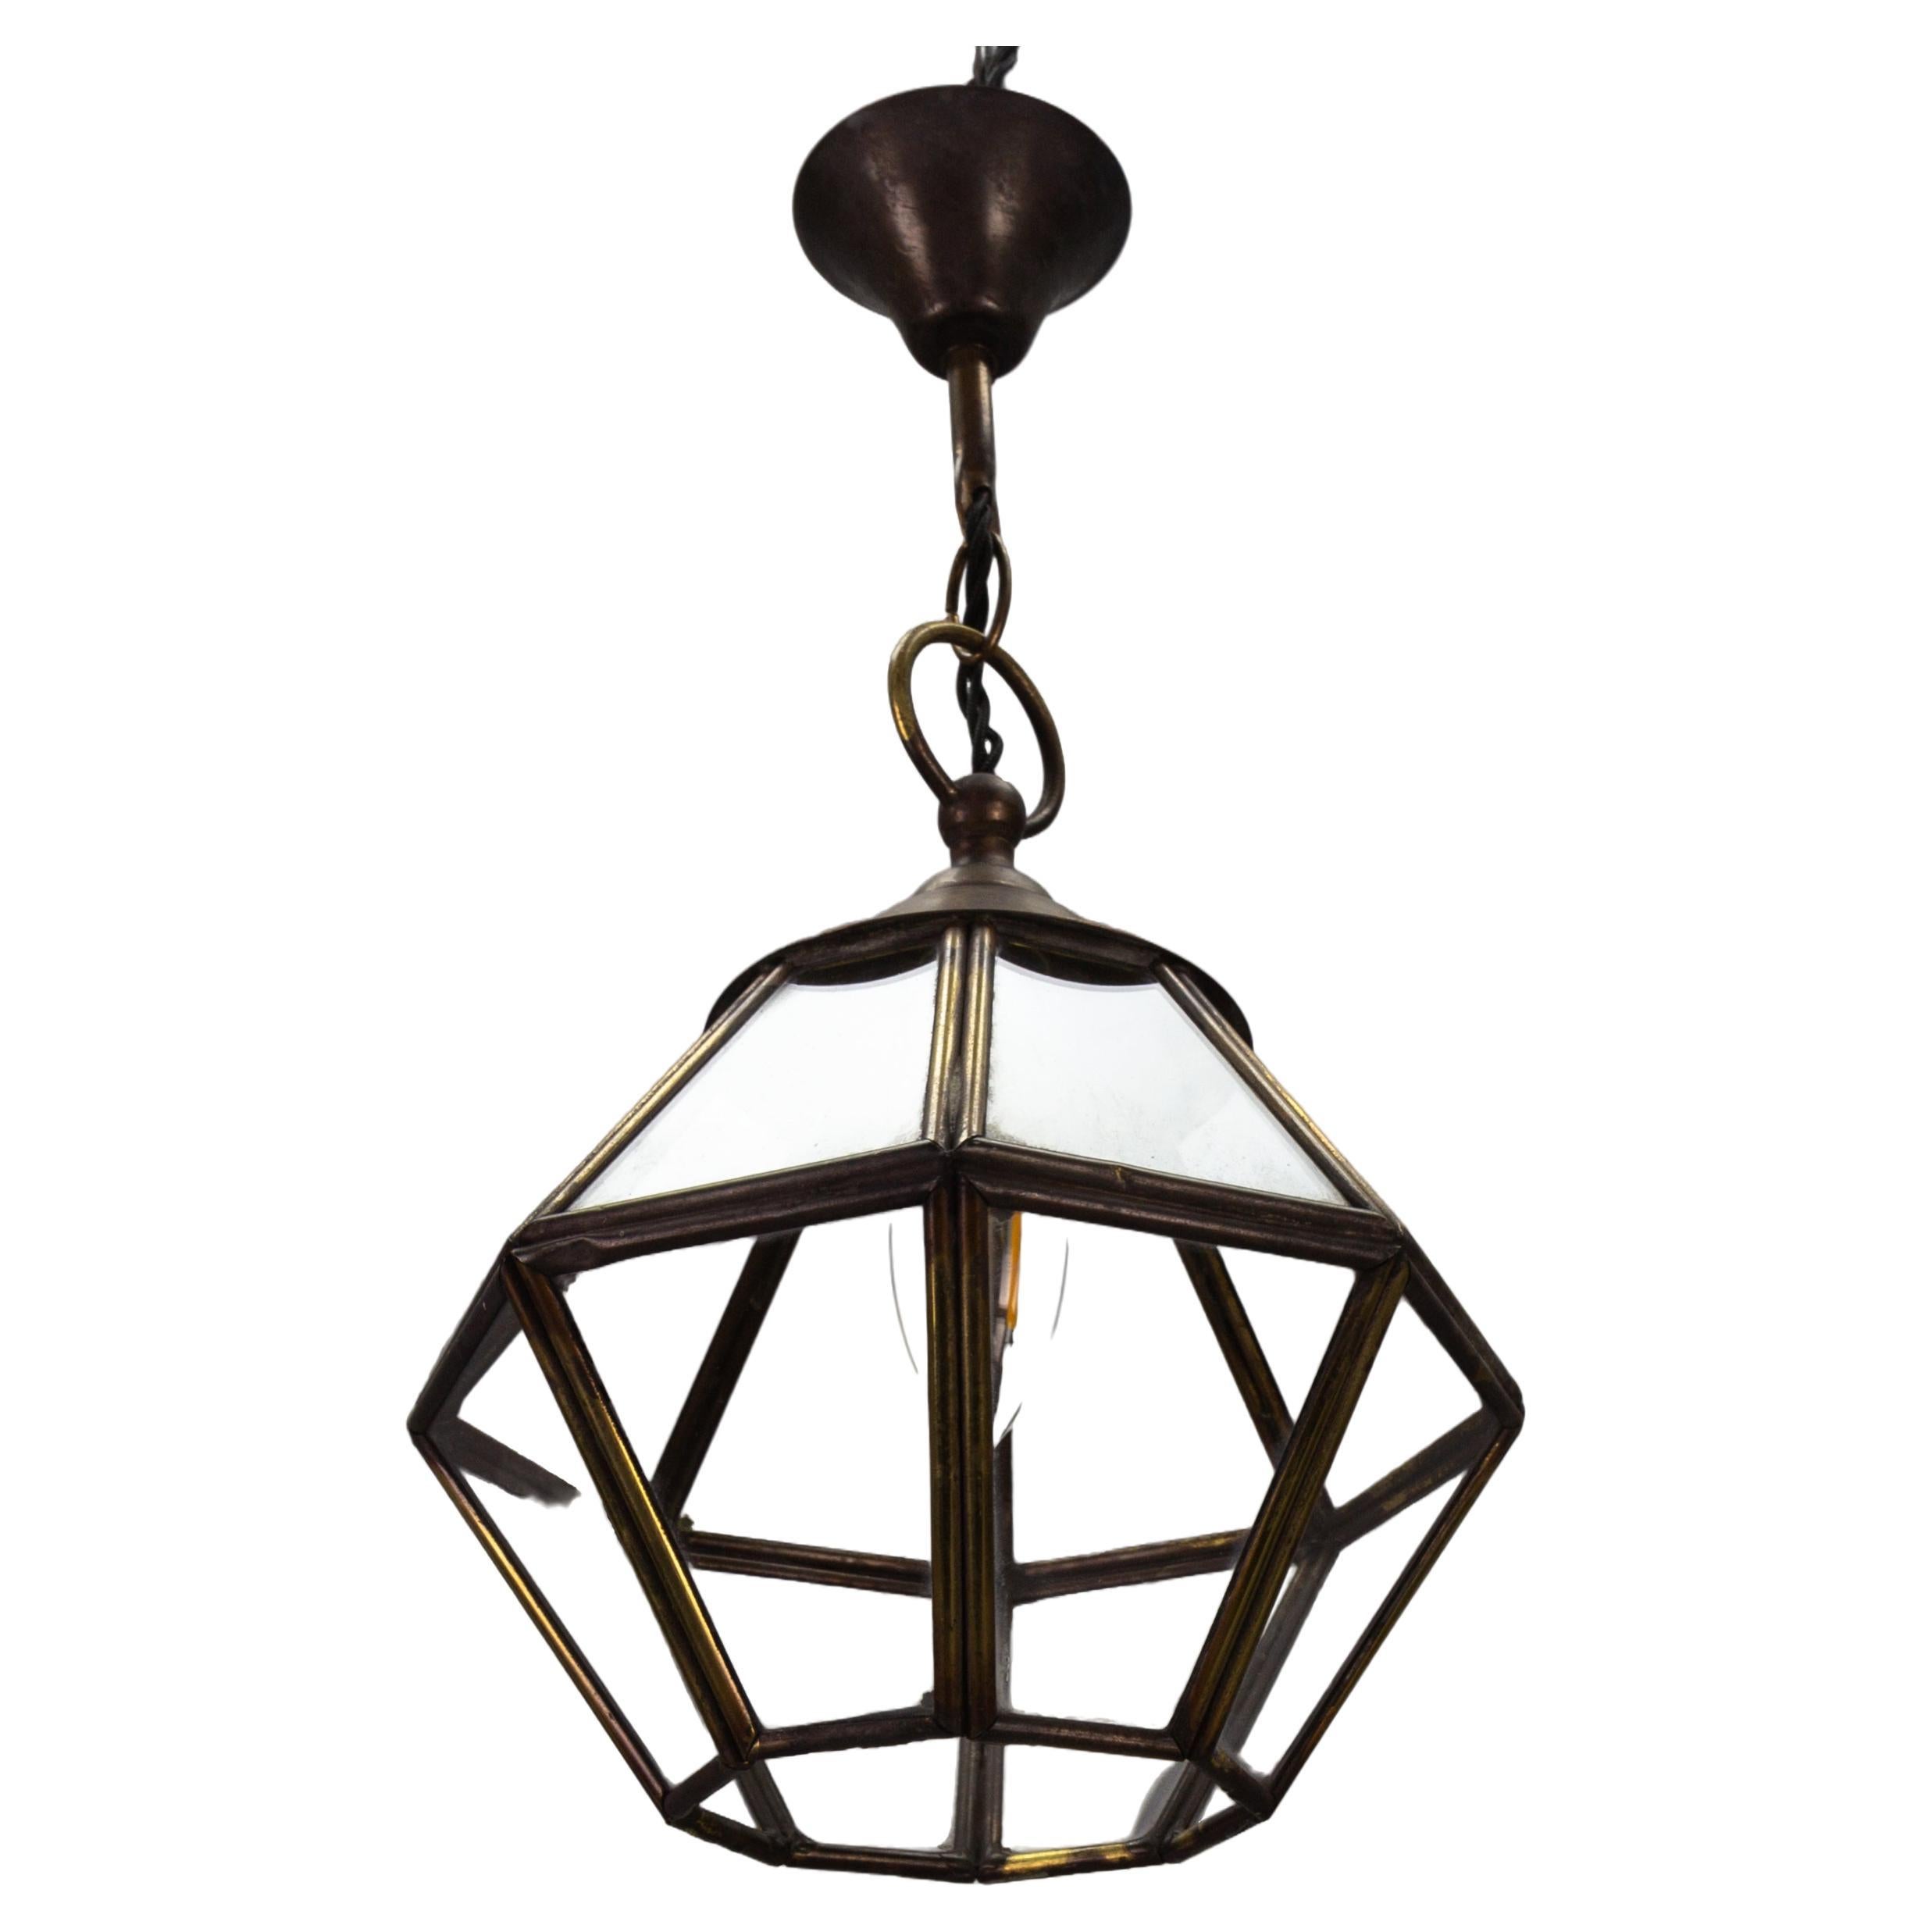 French Midcentury-Modern Brass and Clear Glass Octagonal Hanging Lantern